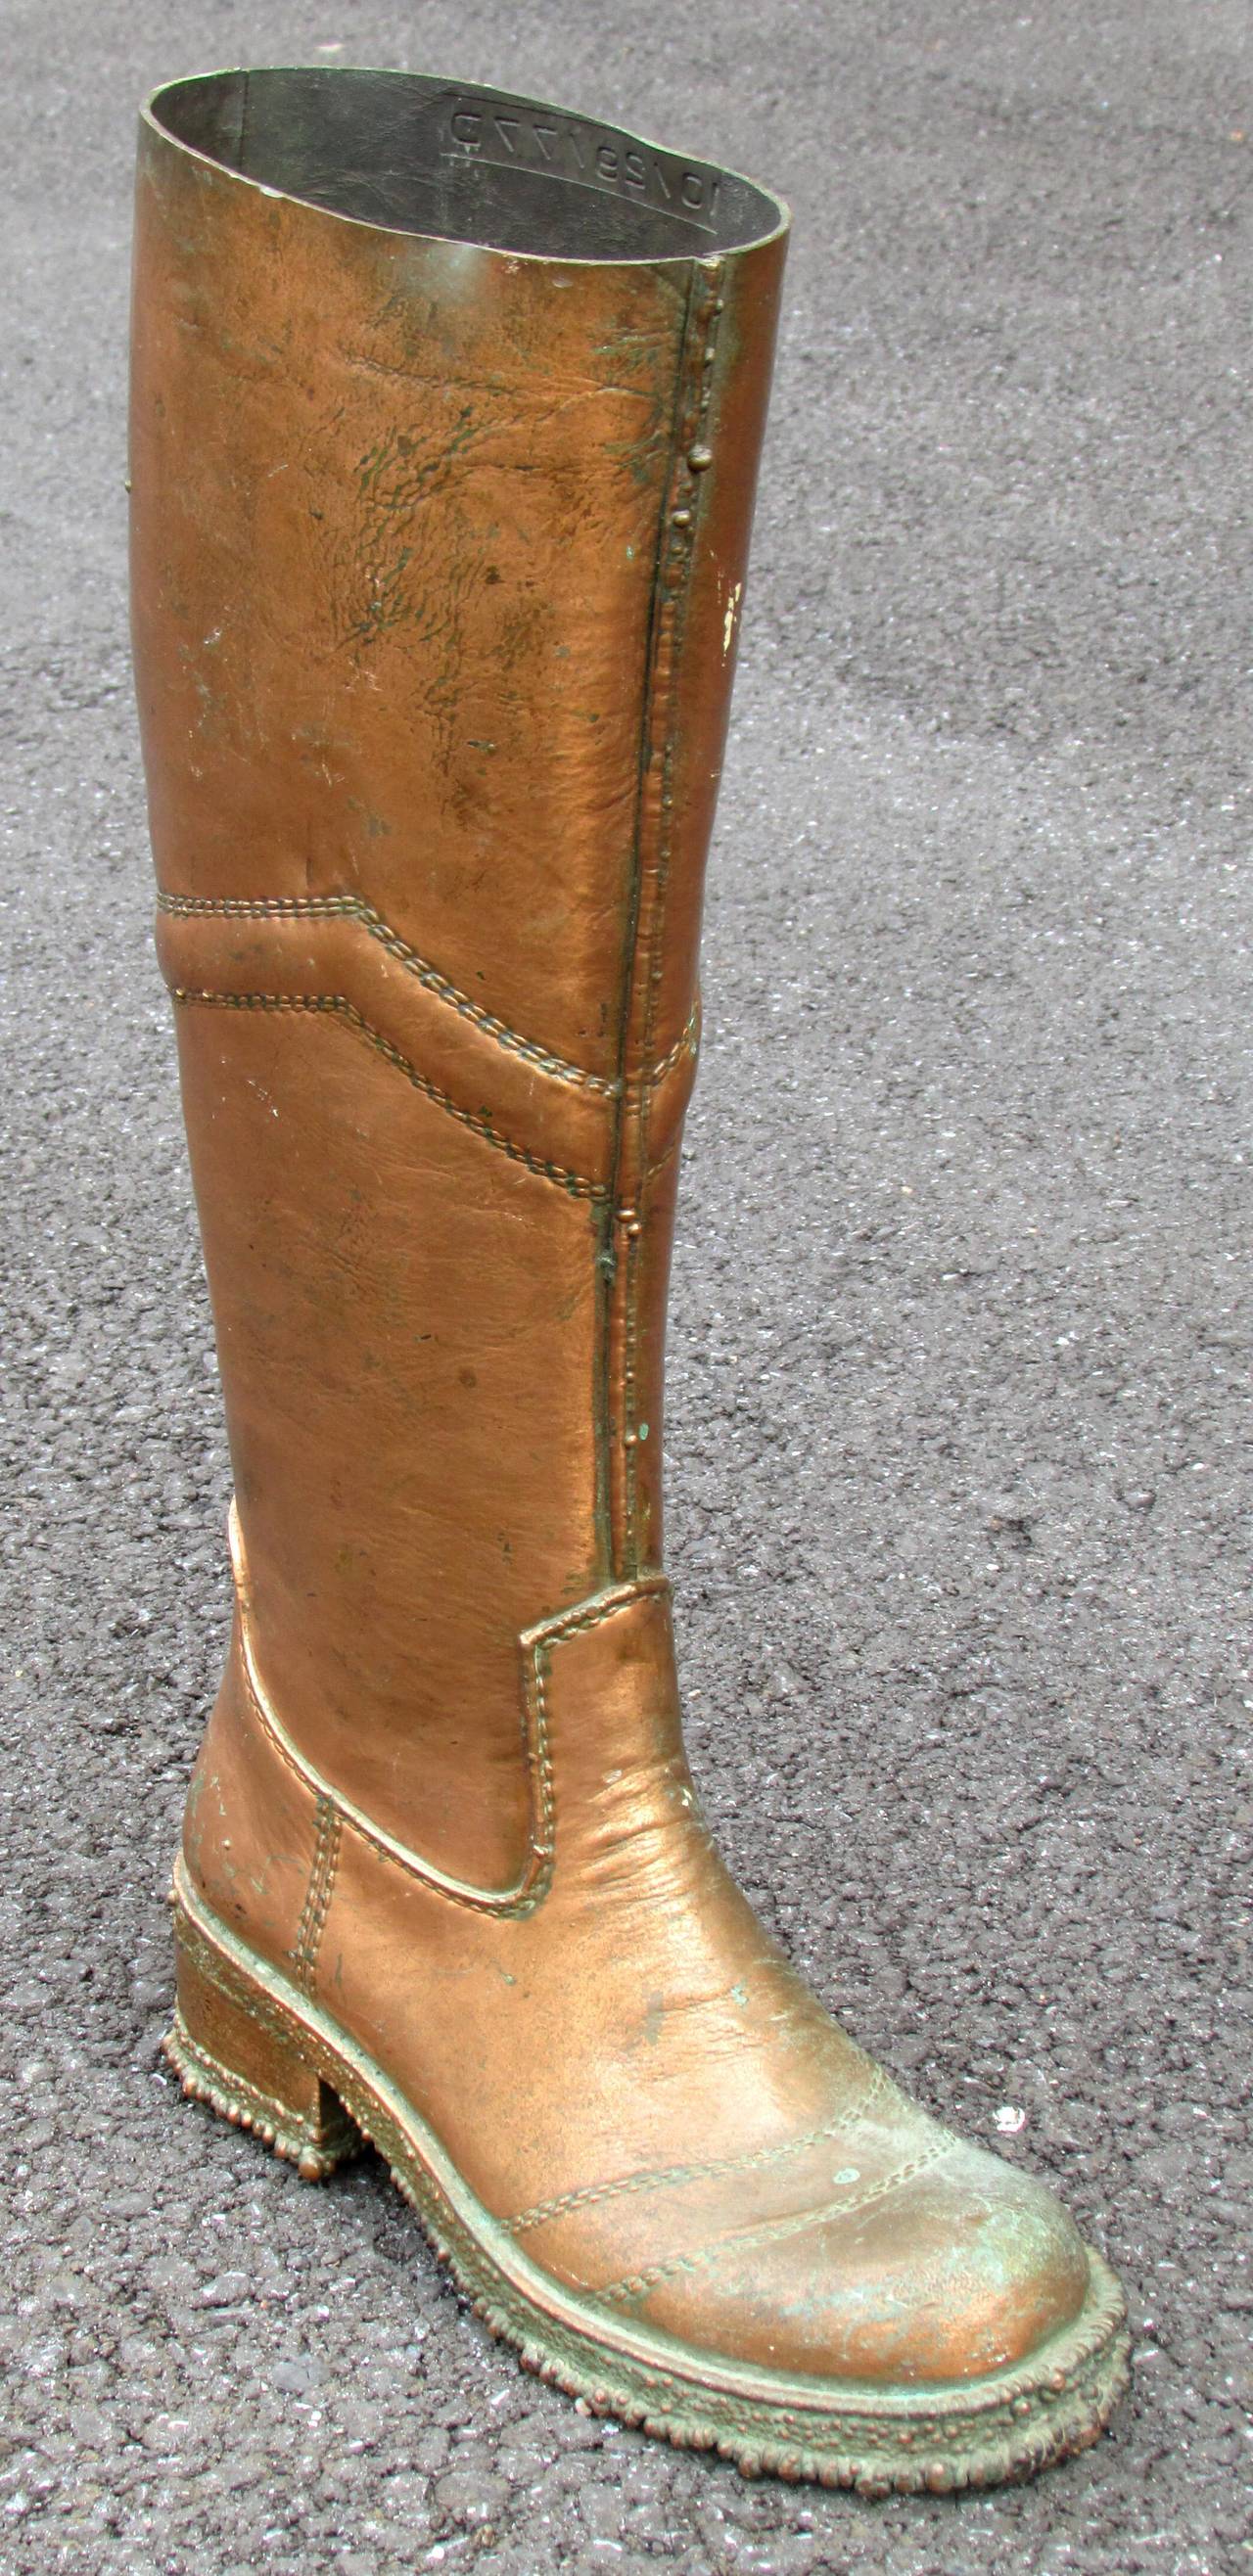 Lifesize bronzed boot sample for a industrial boot these were used by salesmen or at point of sales